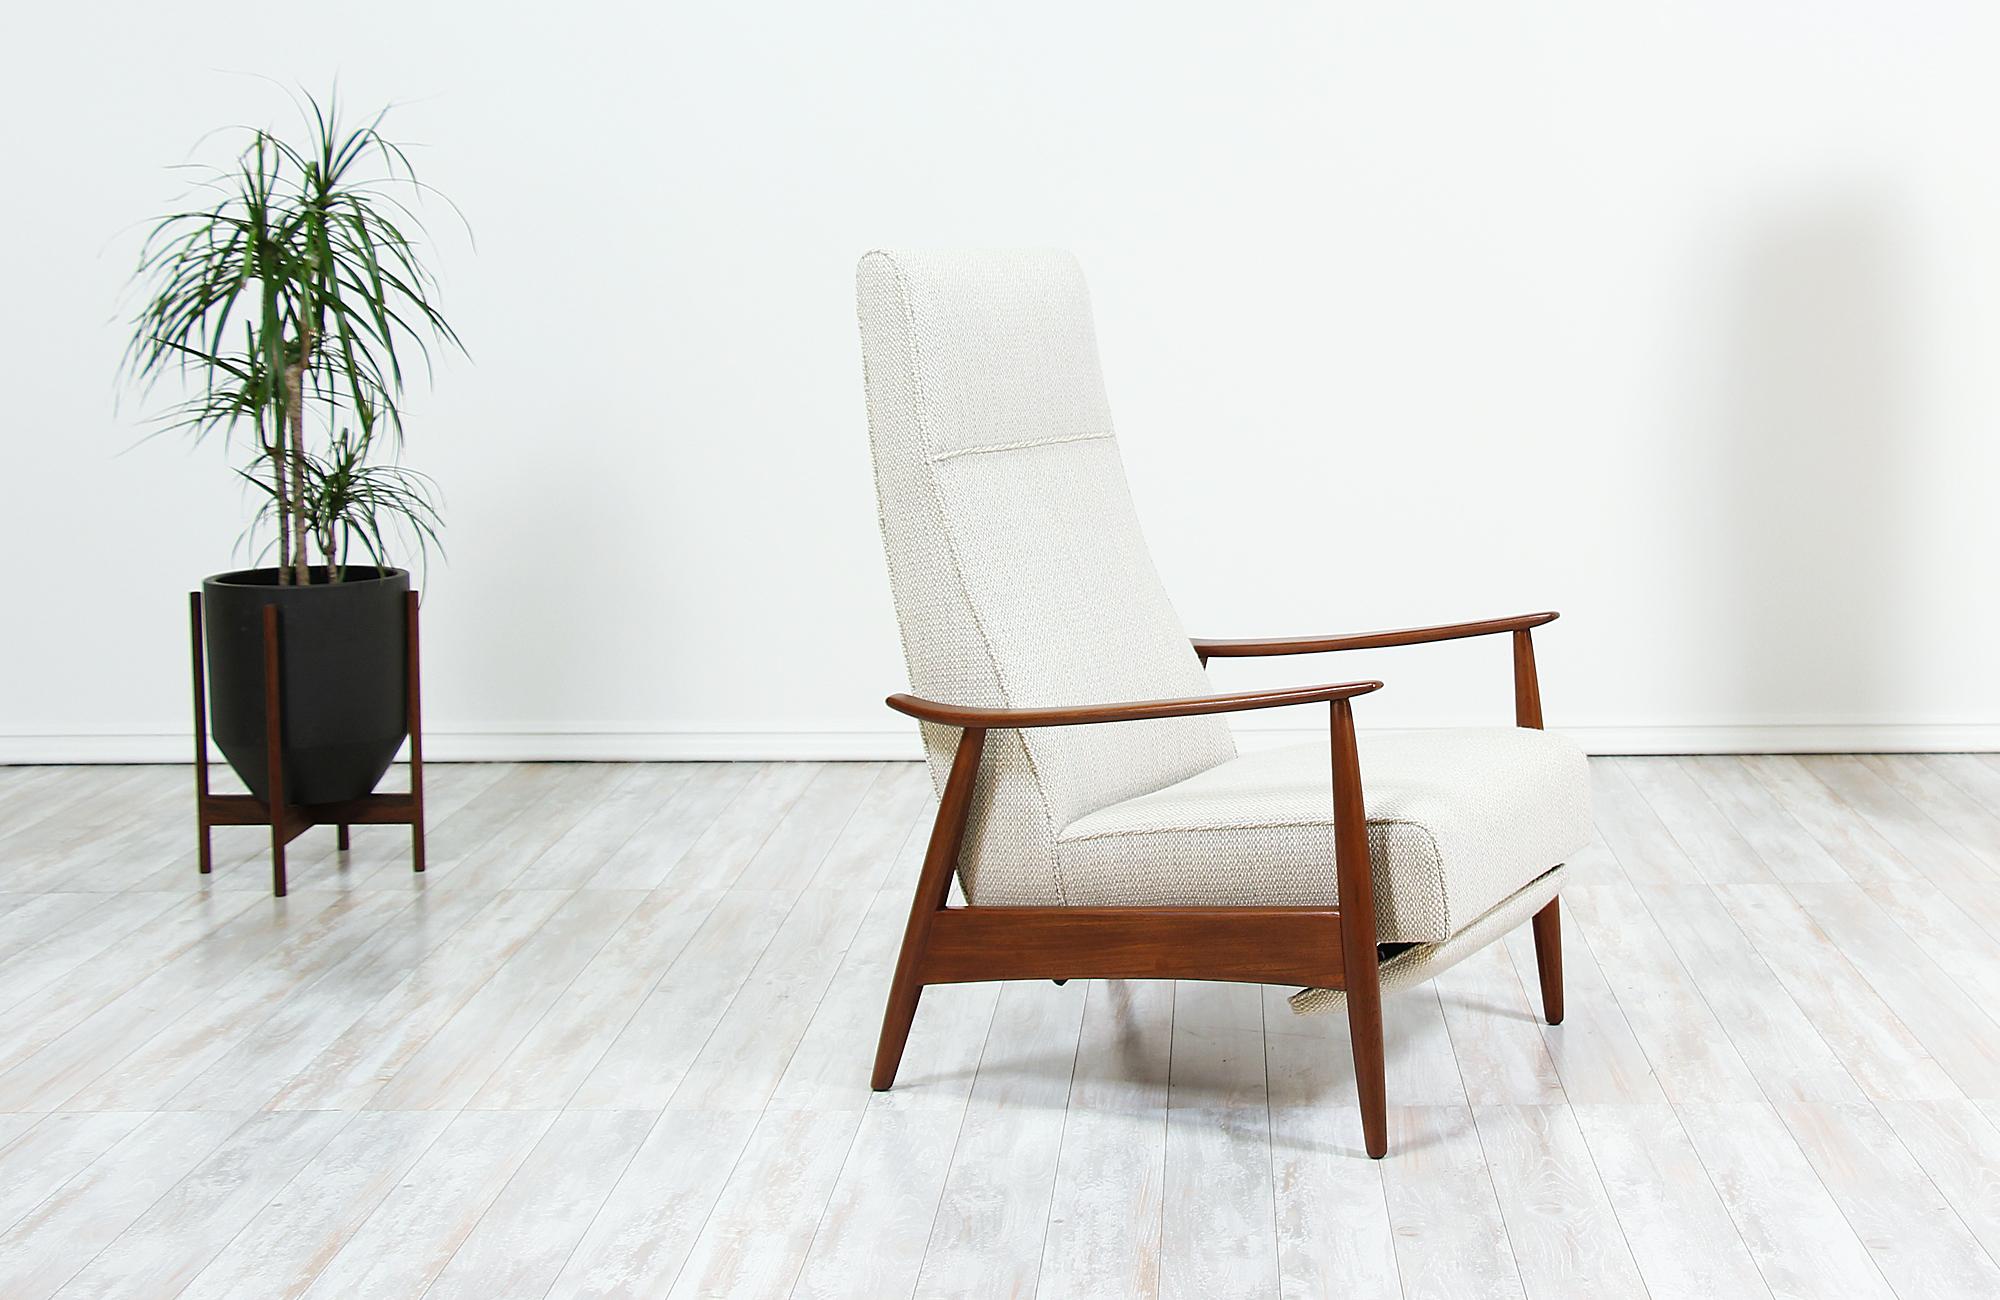 Elegant reclining chair Model-74 designed by Milo Baughman for Thayer Coggin in the United States circa 1950s. This comfortable midcentury recliner features a newly upholstered seat rest in a soft wool blend tweed fabric supported by a warm walnut